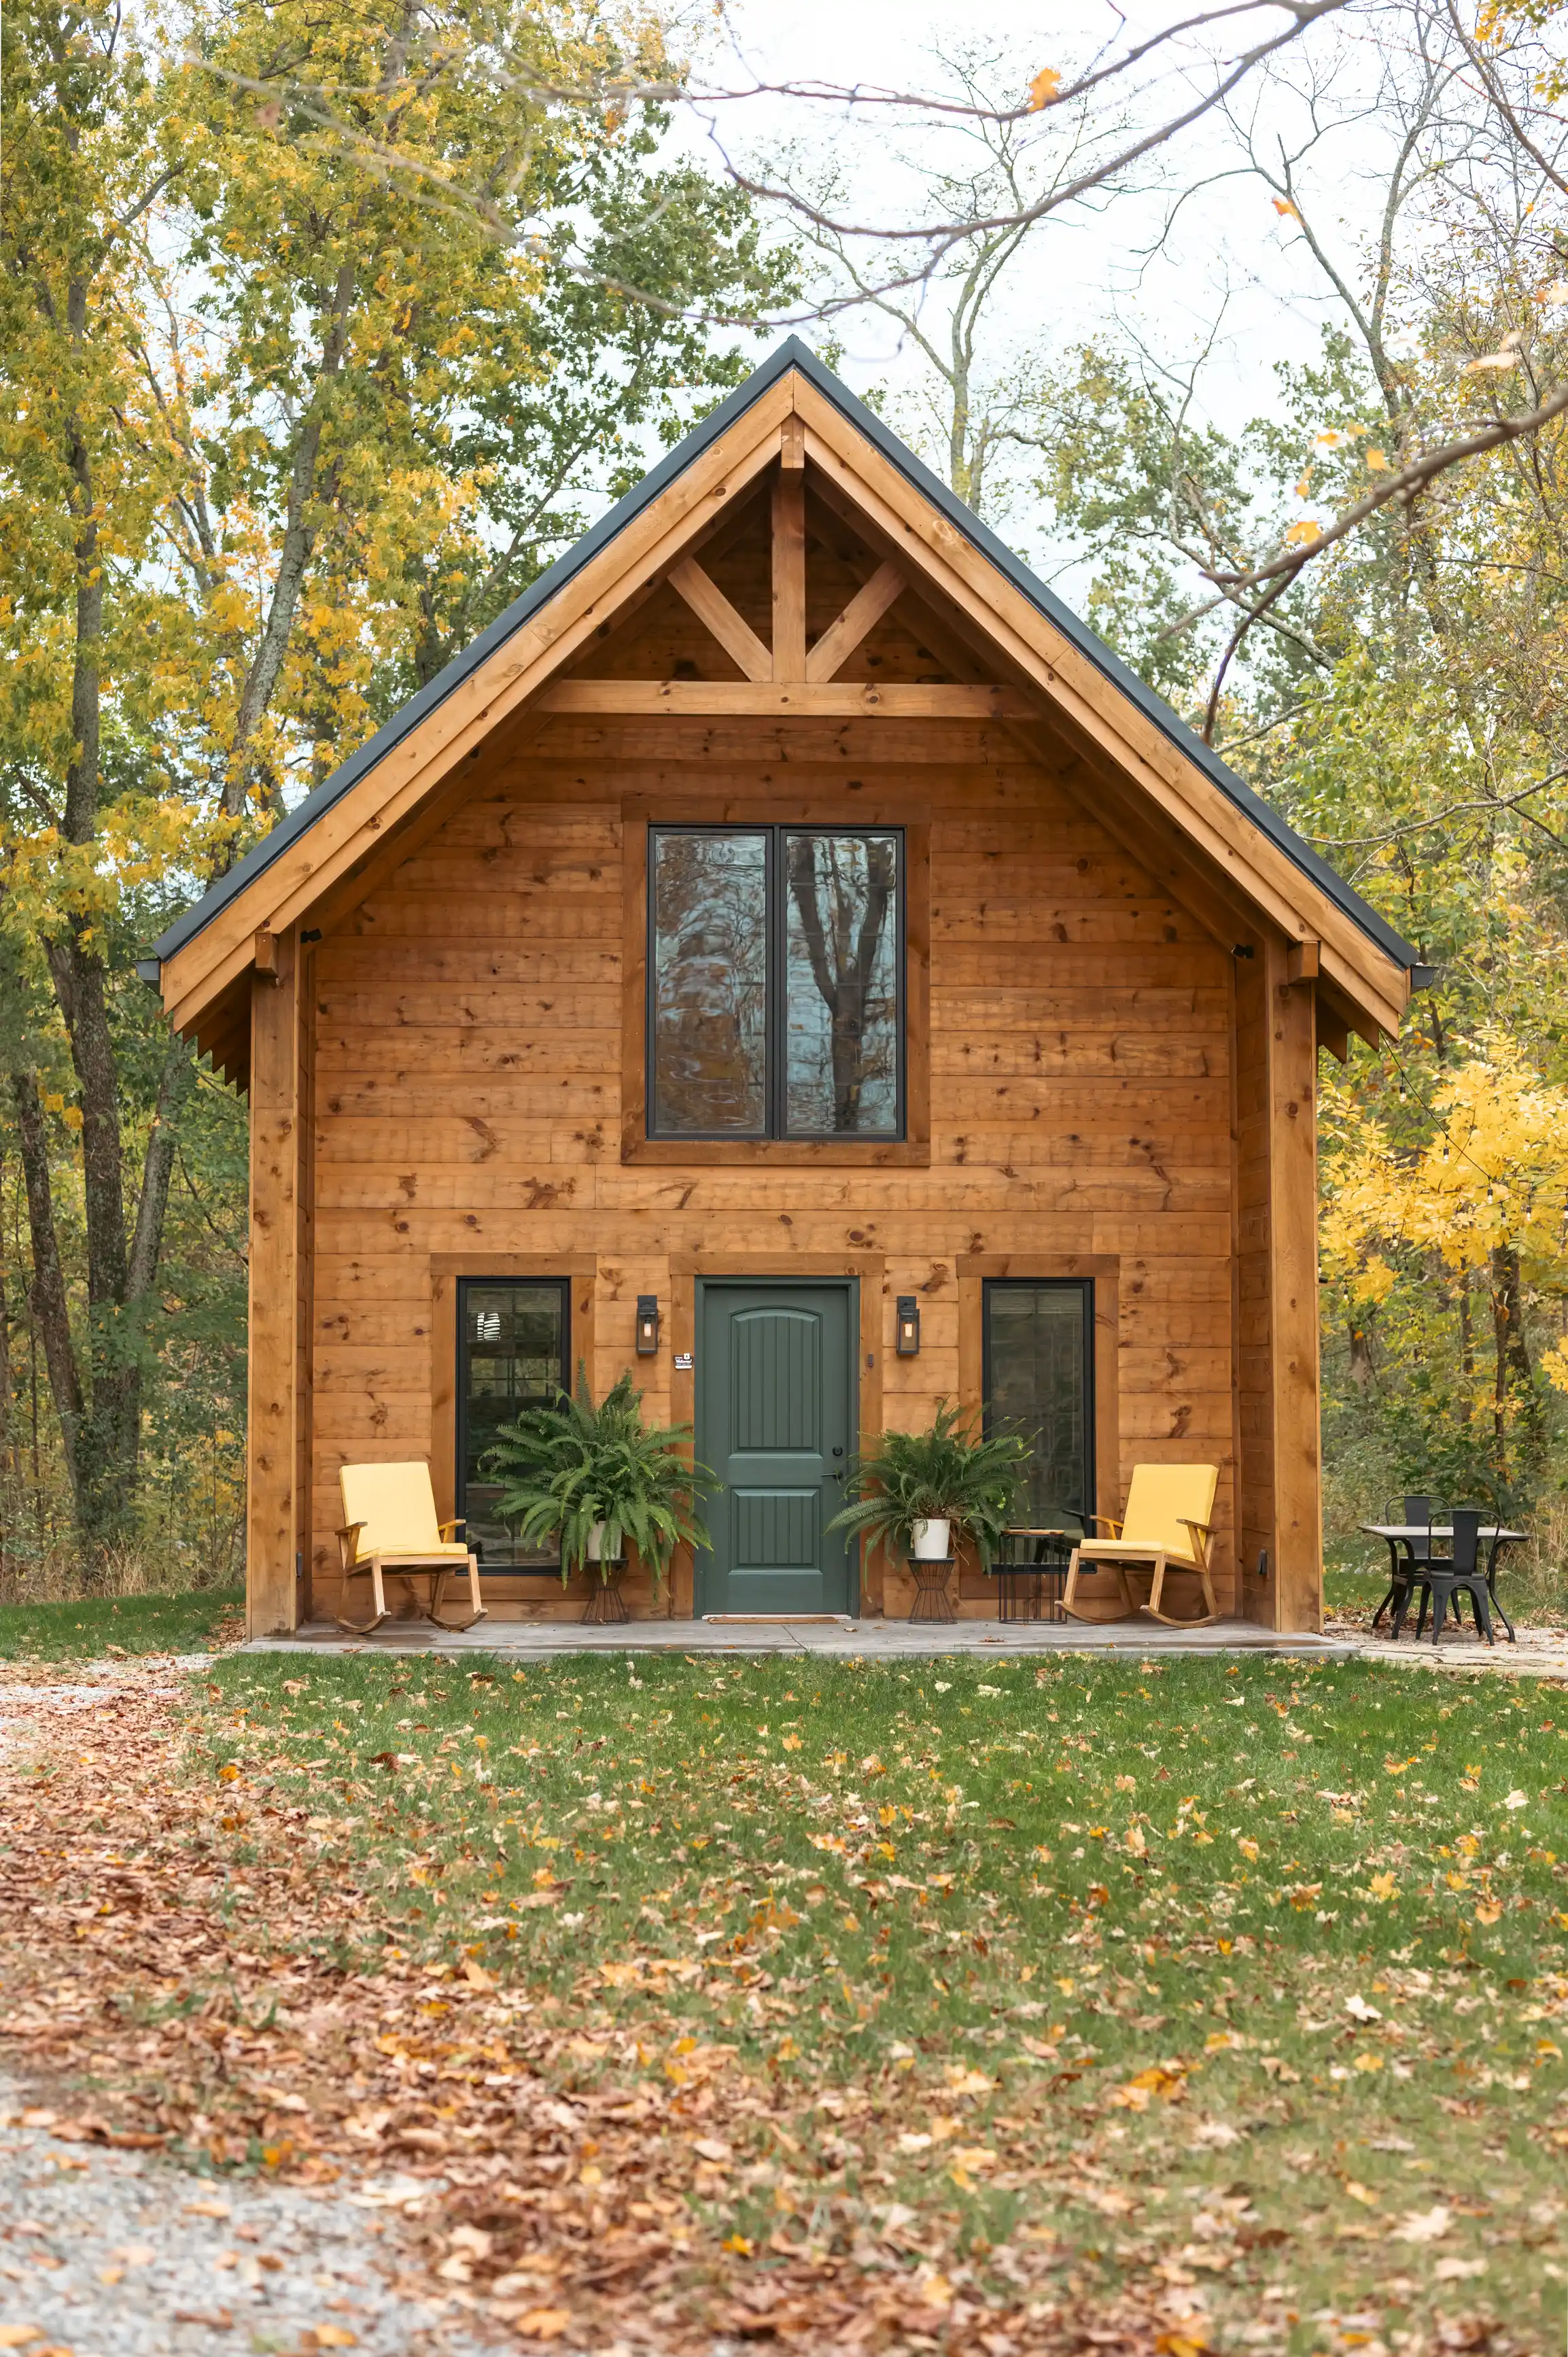 A wooden cabin with a green door, large front window, and a porch with chairs surrounded by trees with autumn leaves.